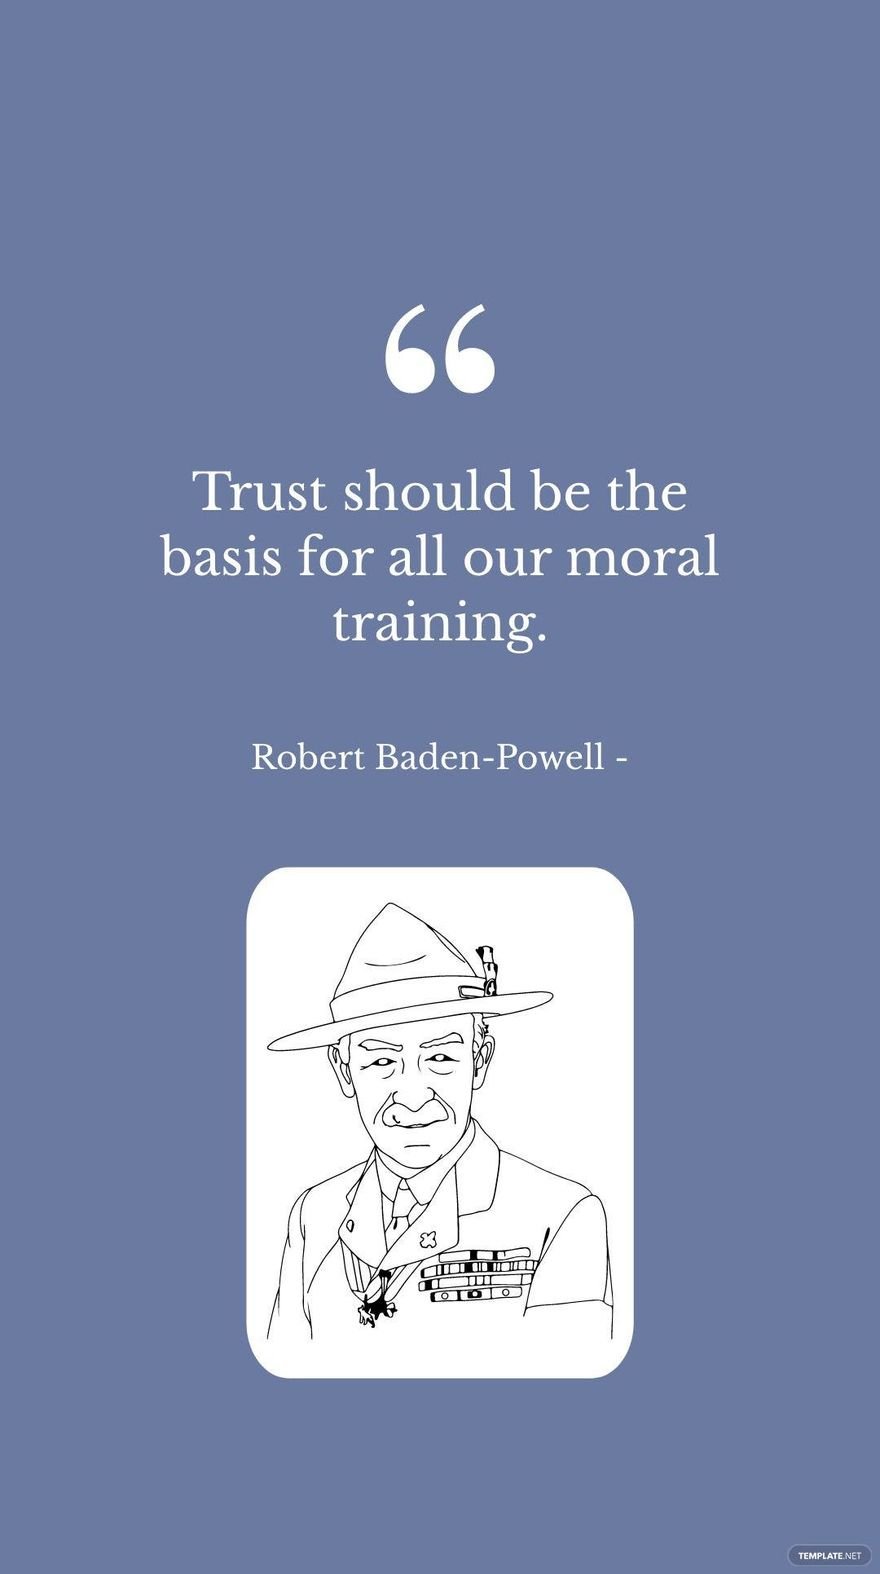 Robert Baden-Powell - Trust should be the basis for all our moral training.